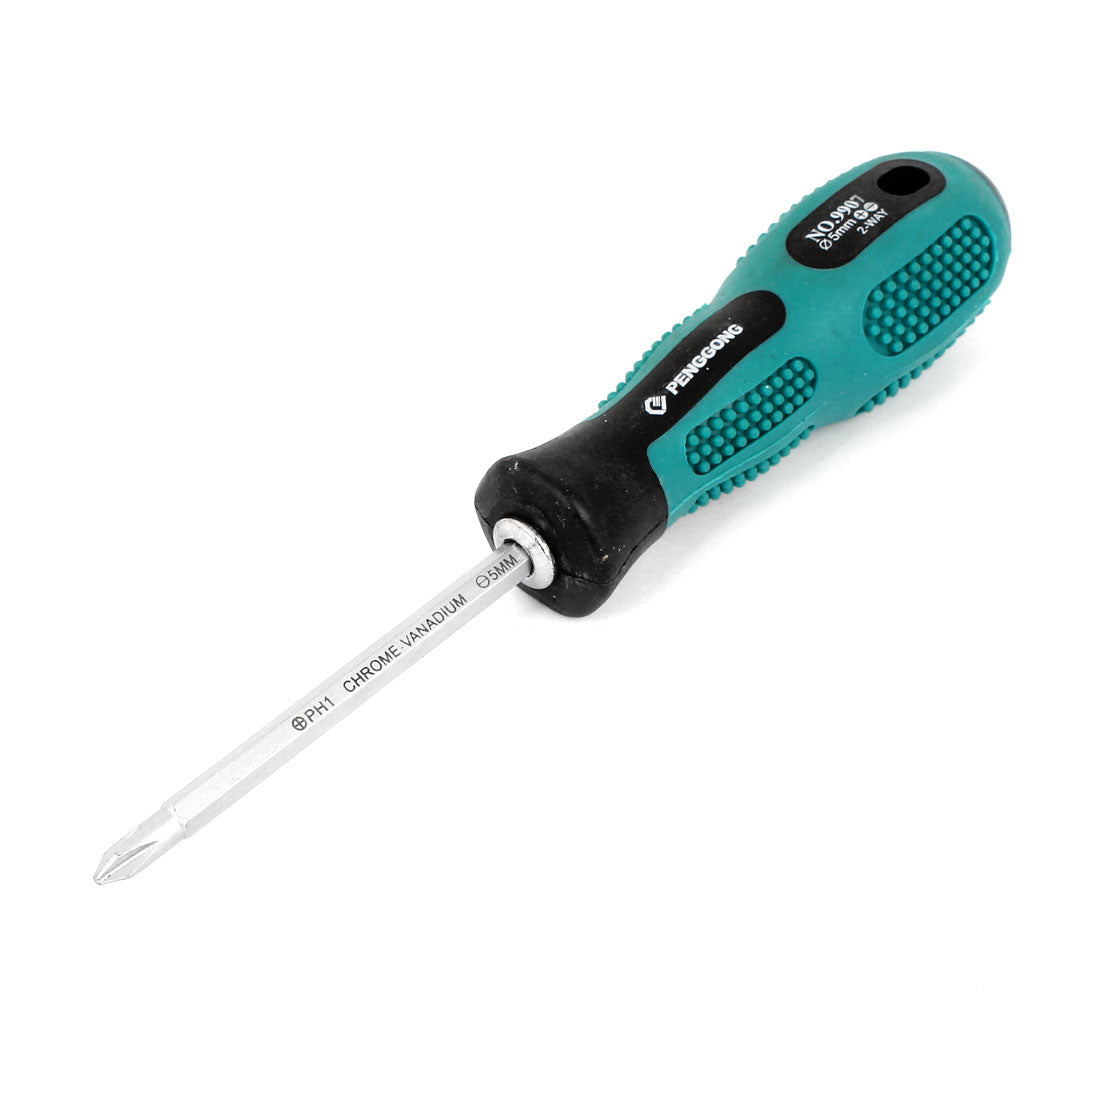 uxcell Uxcell Anti-slip Handle PH1 Phillips Slotted Dual Purpose Screwdriver 5mm x 75mm